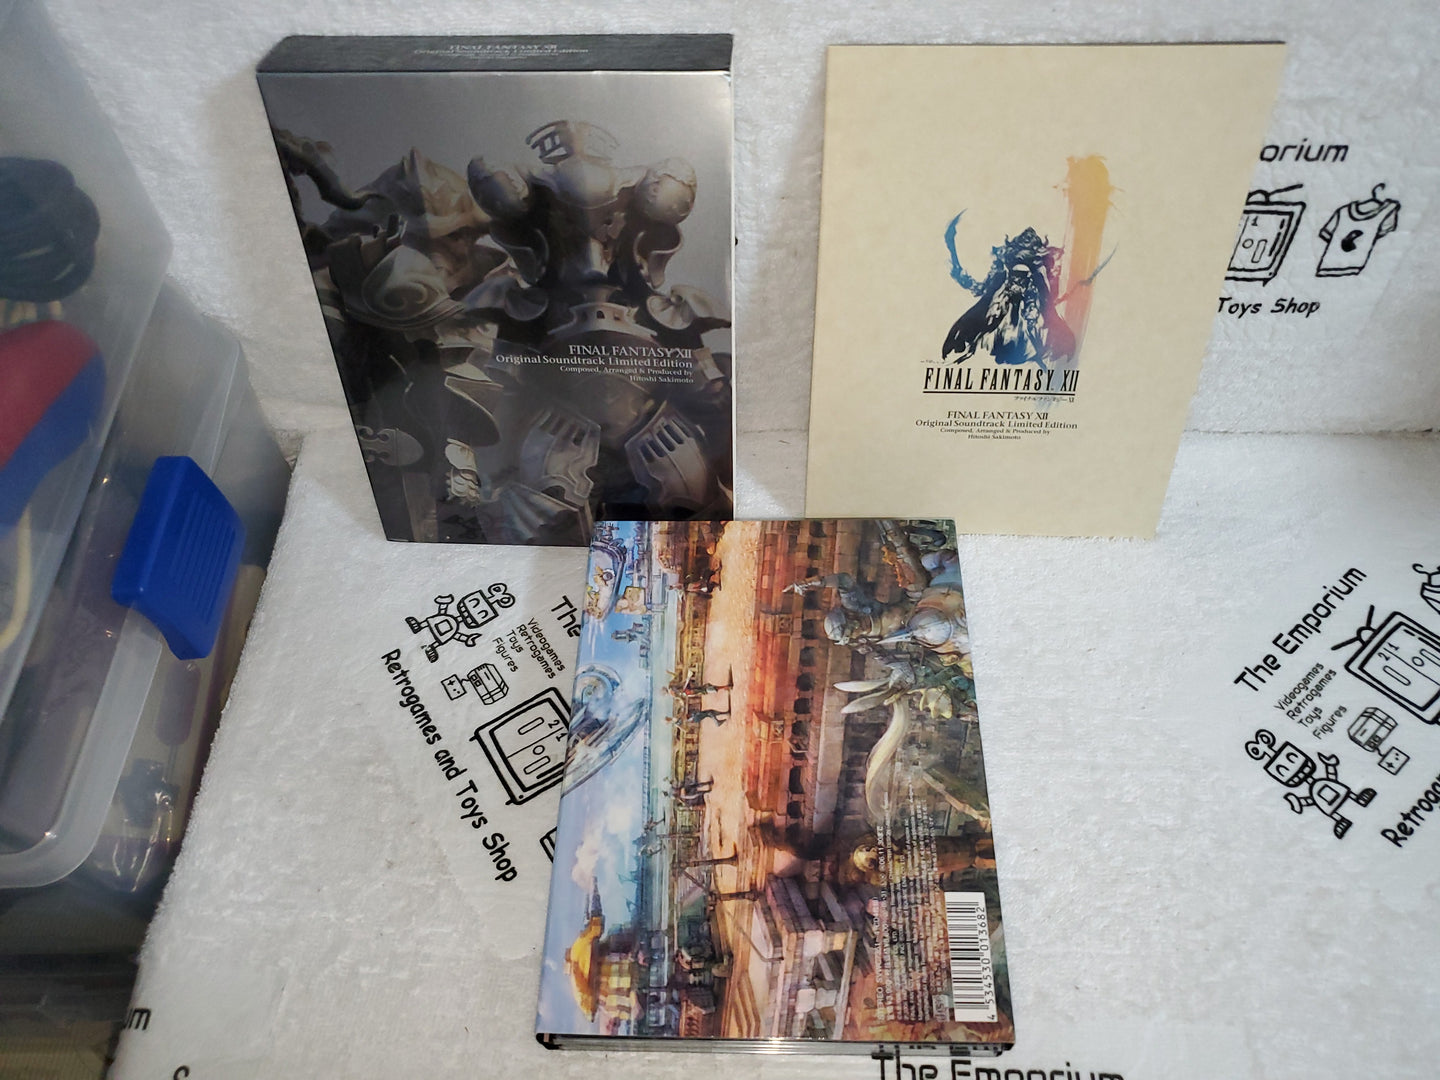 FINAL FANTASY XII limited edition soundtrack original - japanese original soundtrack  japan cd